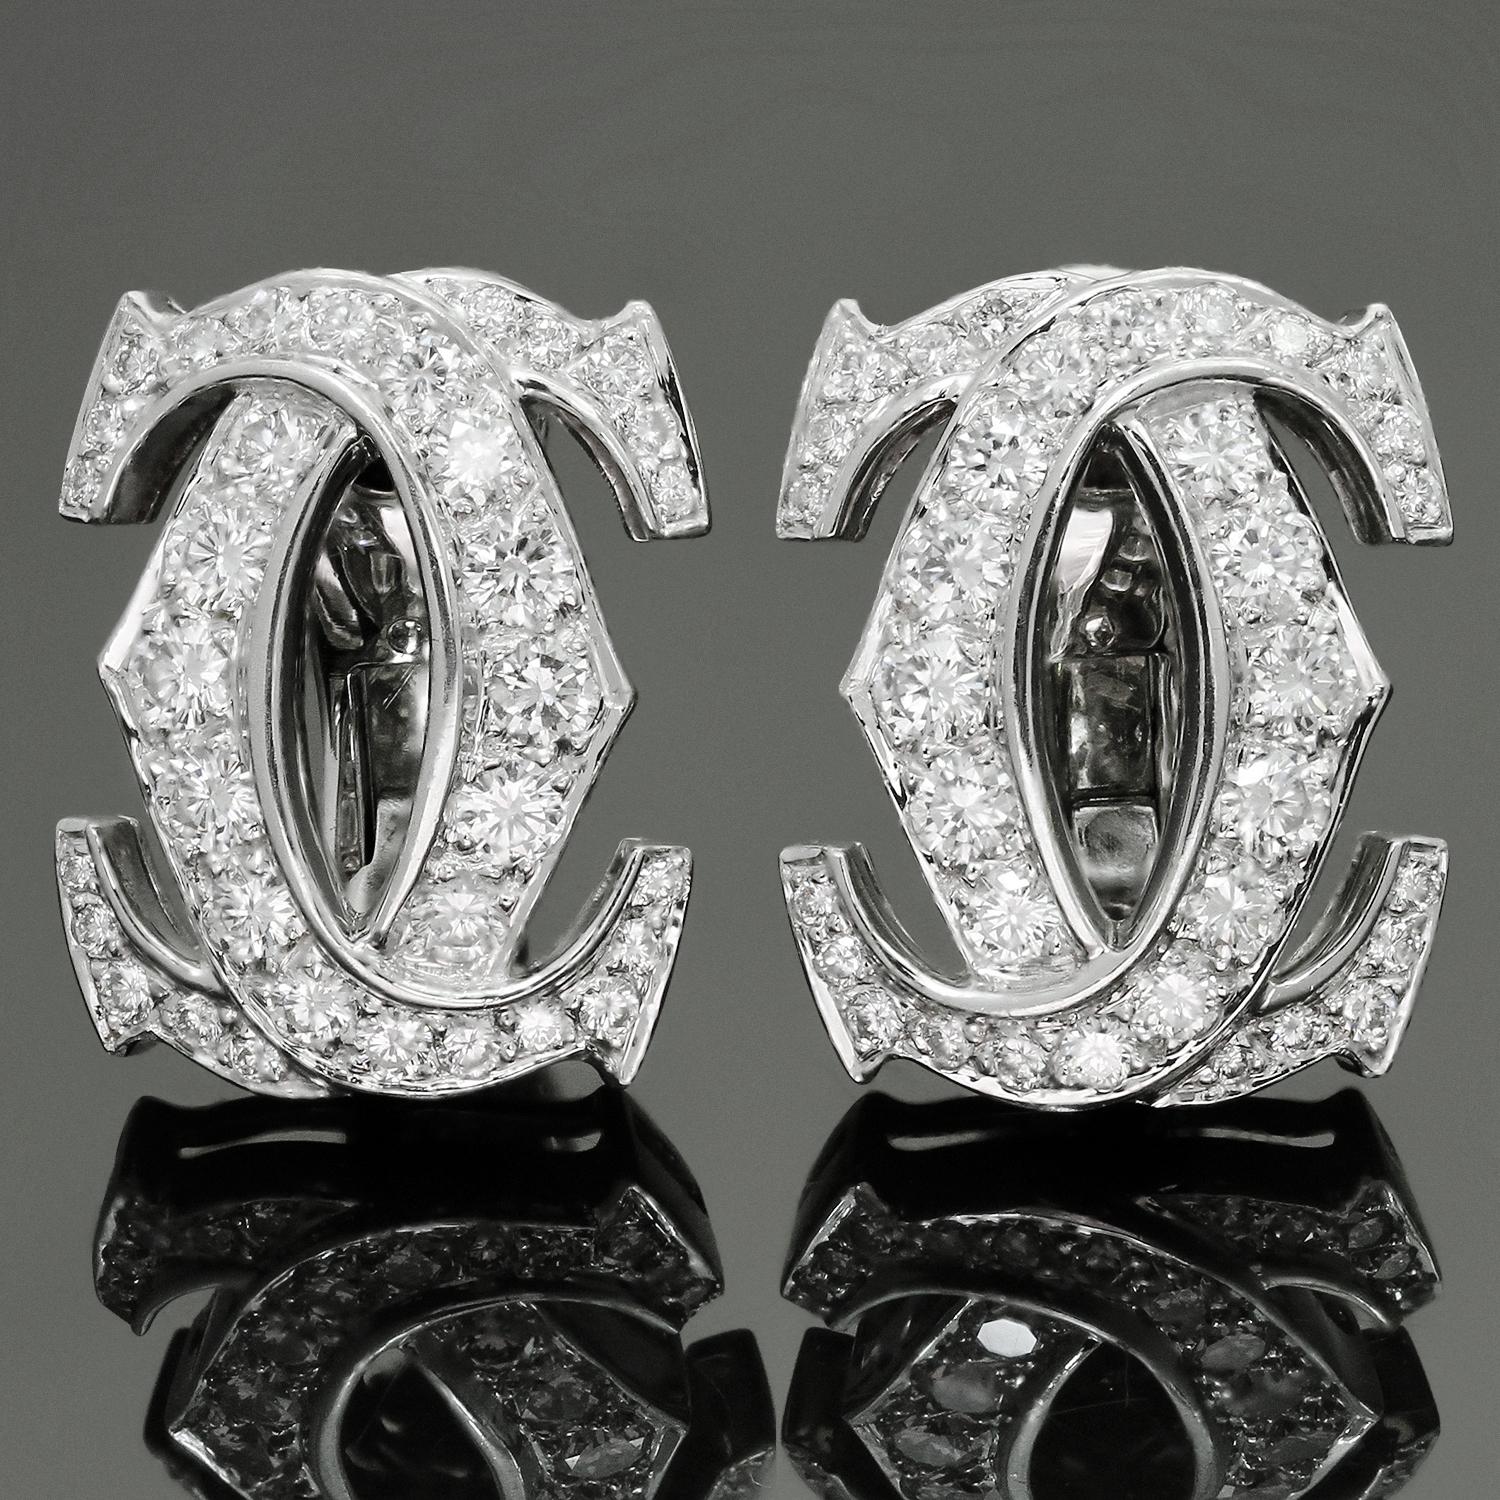 These classic Cartier earrings are crafted in 18k white gold and pave-set with brilliant-cut round D-E-F VVS1-VVS2 diamonds of an estimated 2.40 carats. The most identifiable sign of the Cartier world is double C design is a symbol of timeless every